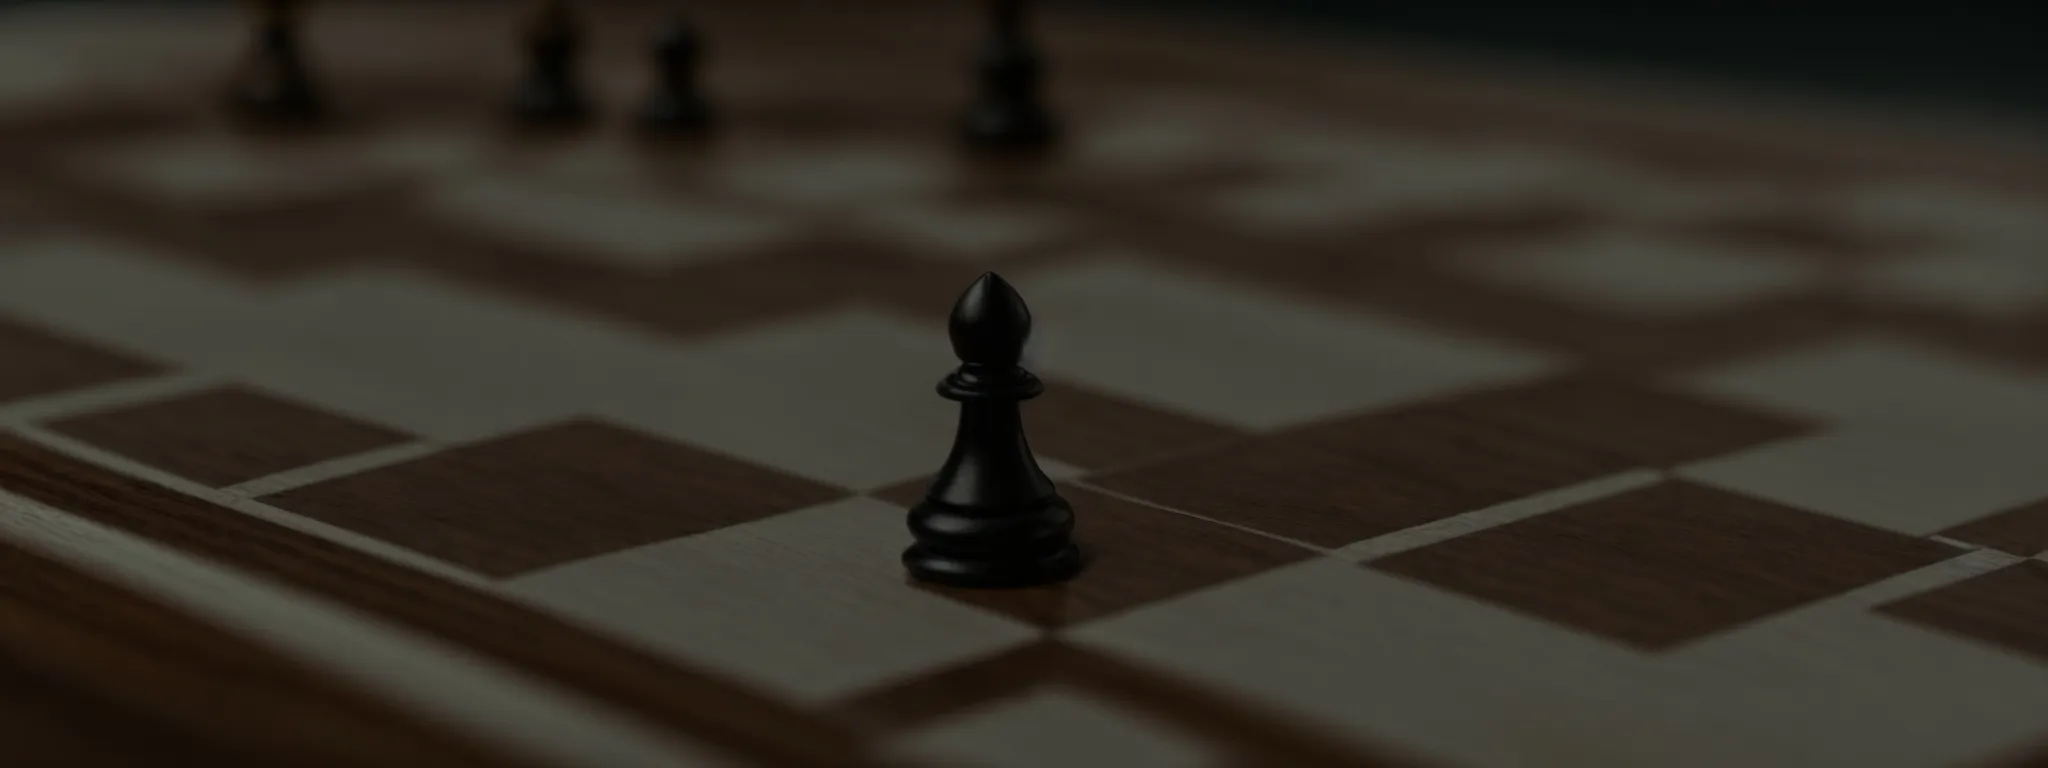 a close-up of a chessboard under soft lighting, with a focus on a centrically placed, solitary queen piece.